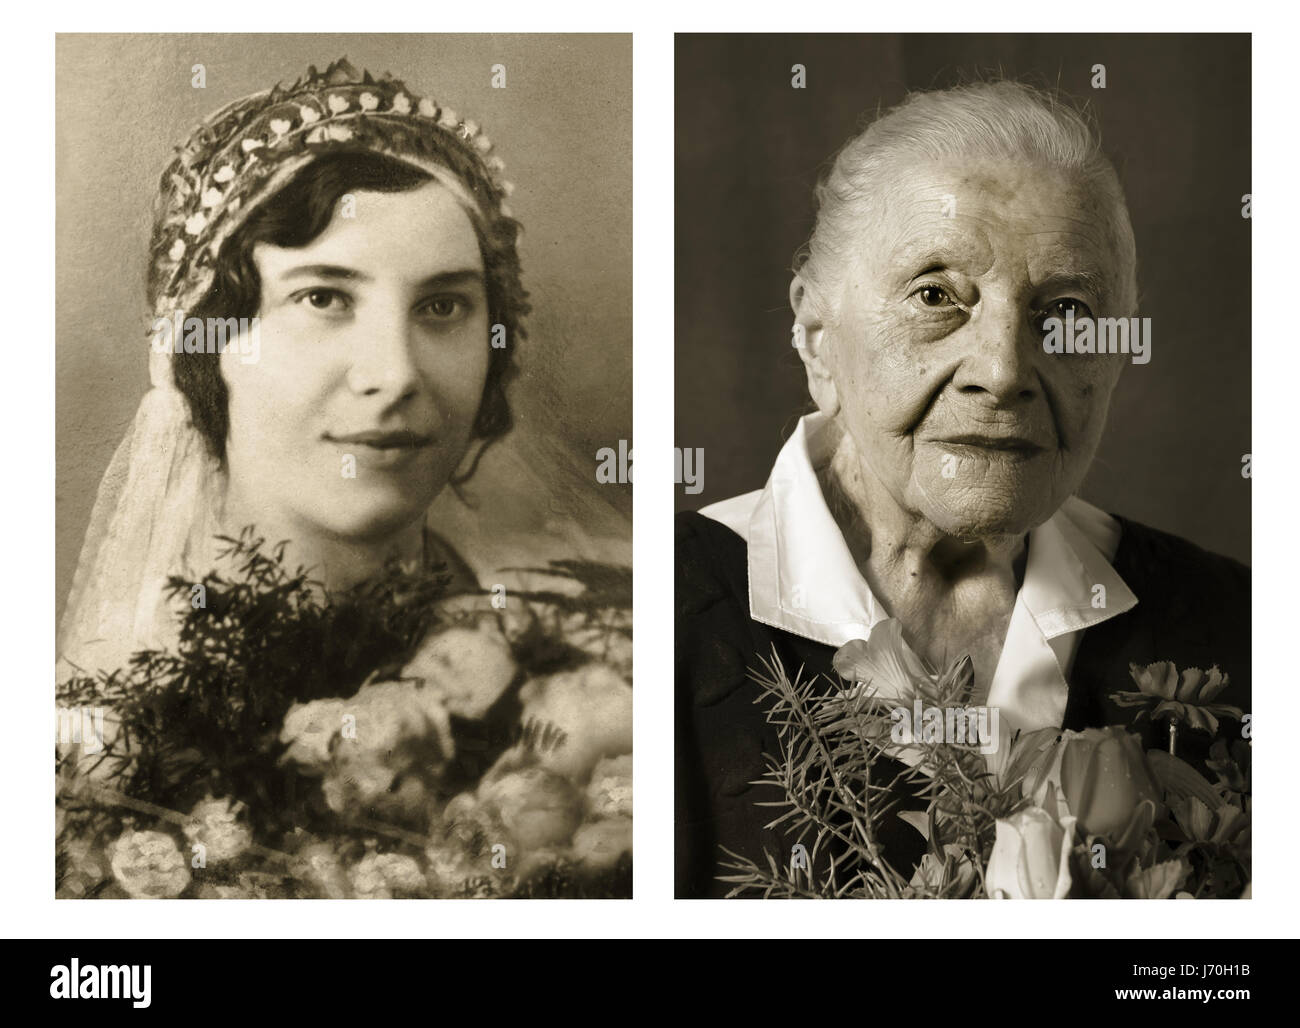 Marie Burešová. Left: 23 years old, right: 101 years old. She was a butcher and now lives in her own flat in Zlin. Her family still visit her every day. POIGNANT portraits have posed centenarians alongside their younger selves in a project called Faces of Century. The incredible images tell the unique stories of each person’s life including one woman who was in the truck that hit and killed high-ranking German Nazi official Reinhard Heydrich’s son Klaus in 1943. Another intriguing tale comes from a 101-year-old woman who decided to leave her luxury villa after turning 101 and burnt all materia Stock Photo